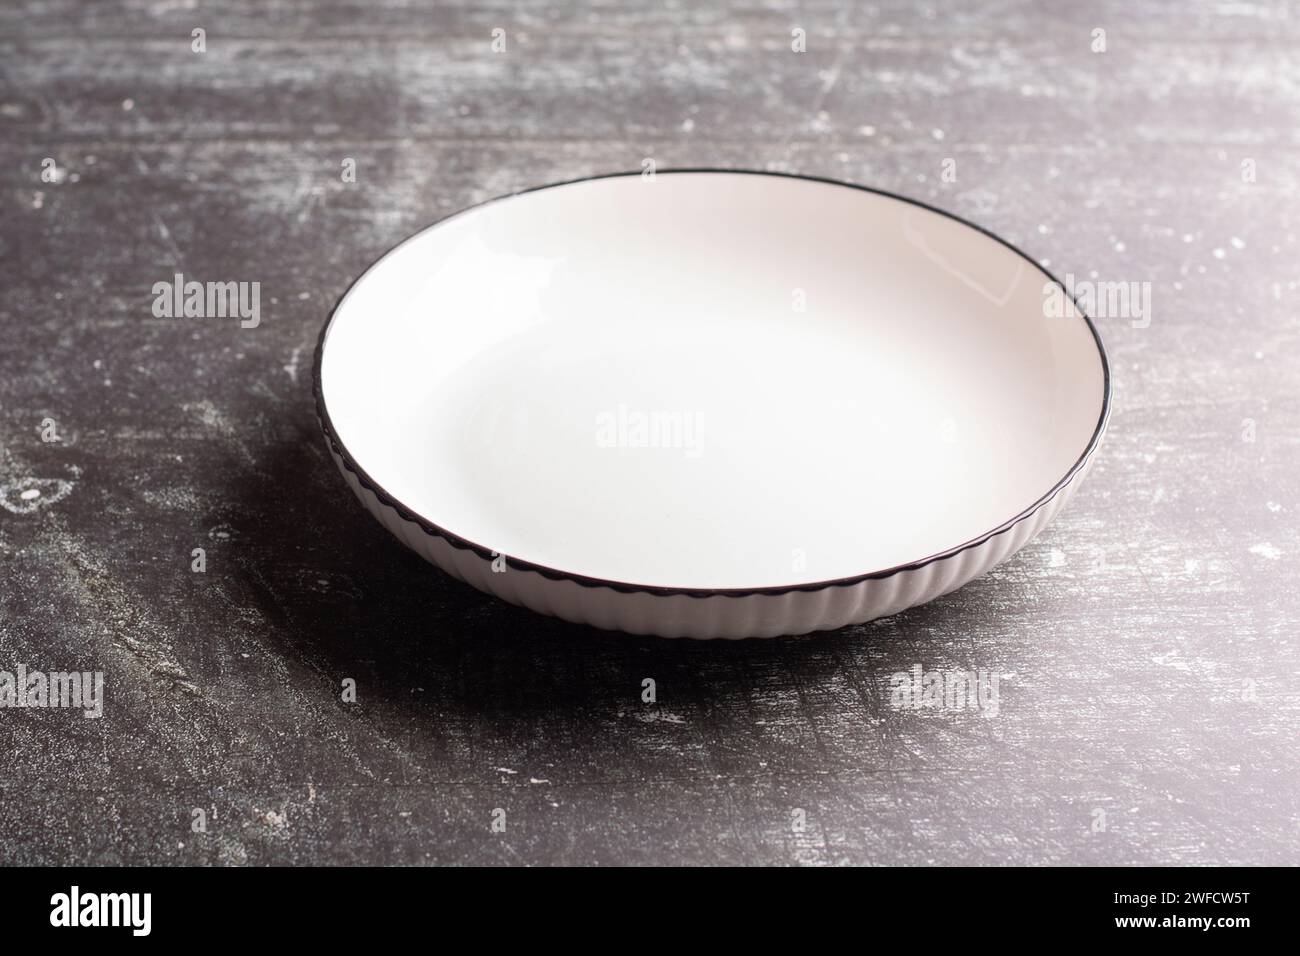 plate, round, empty, white, dish, dinner, food, dining, blank, kitchen, ceramic, clean, crockery, object, background, lunch, cutlery, view, table, cir Stock Photo